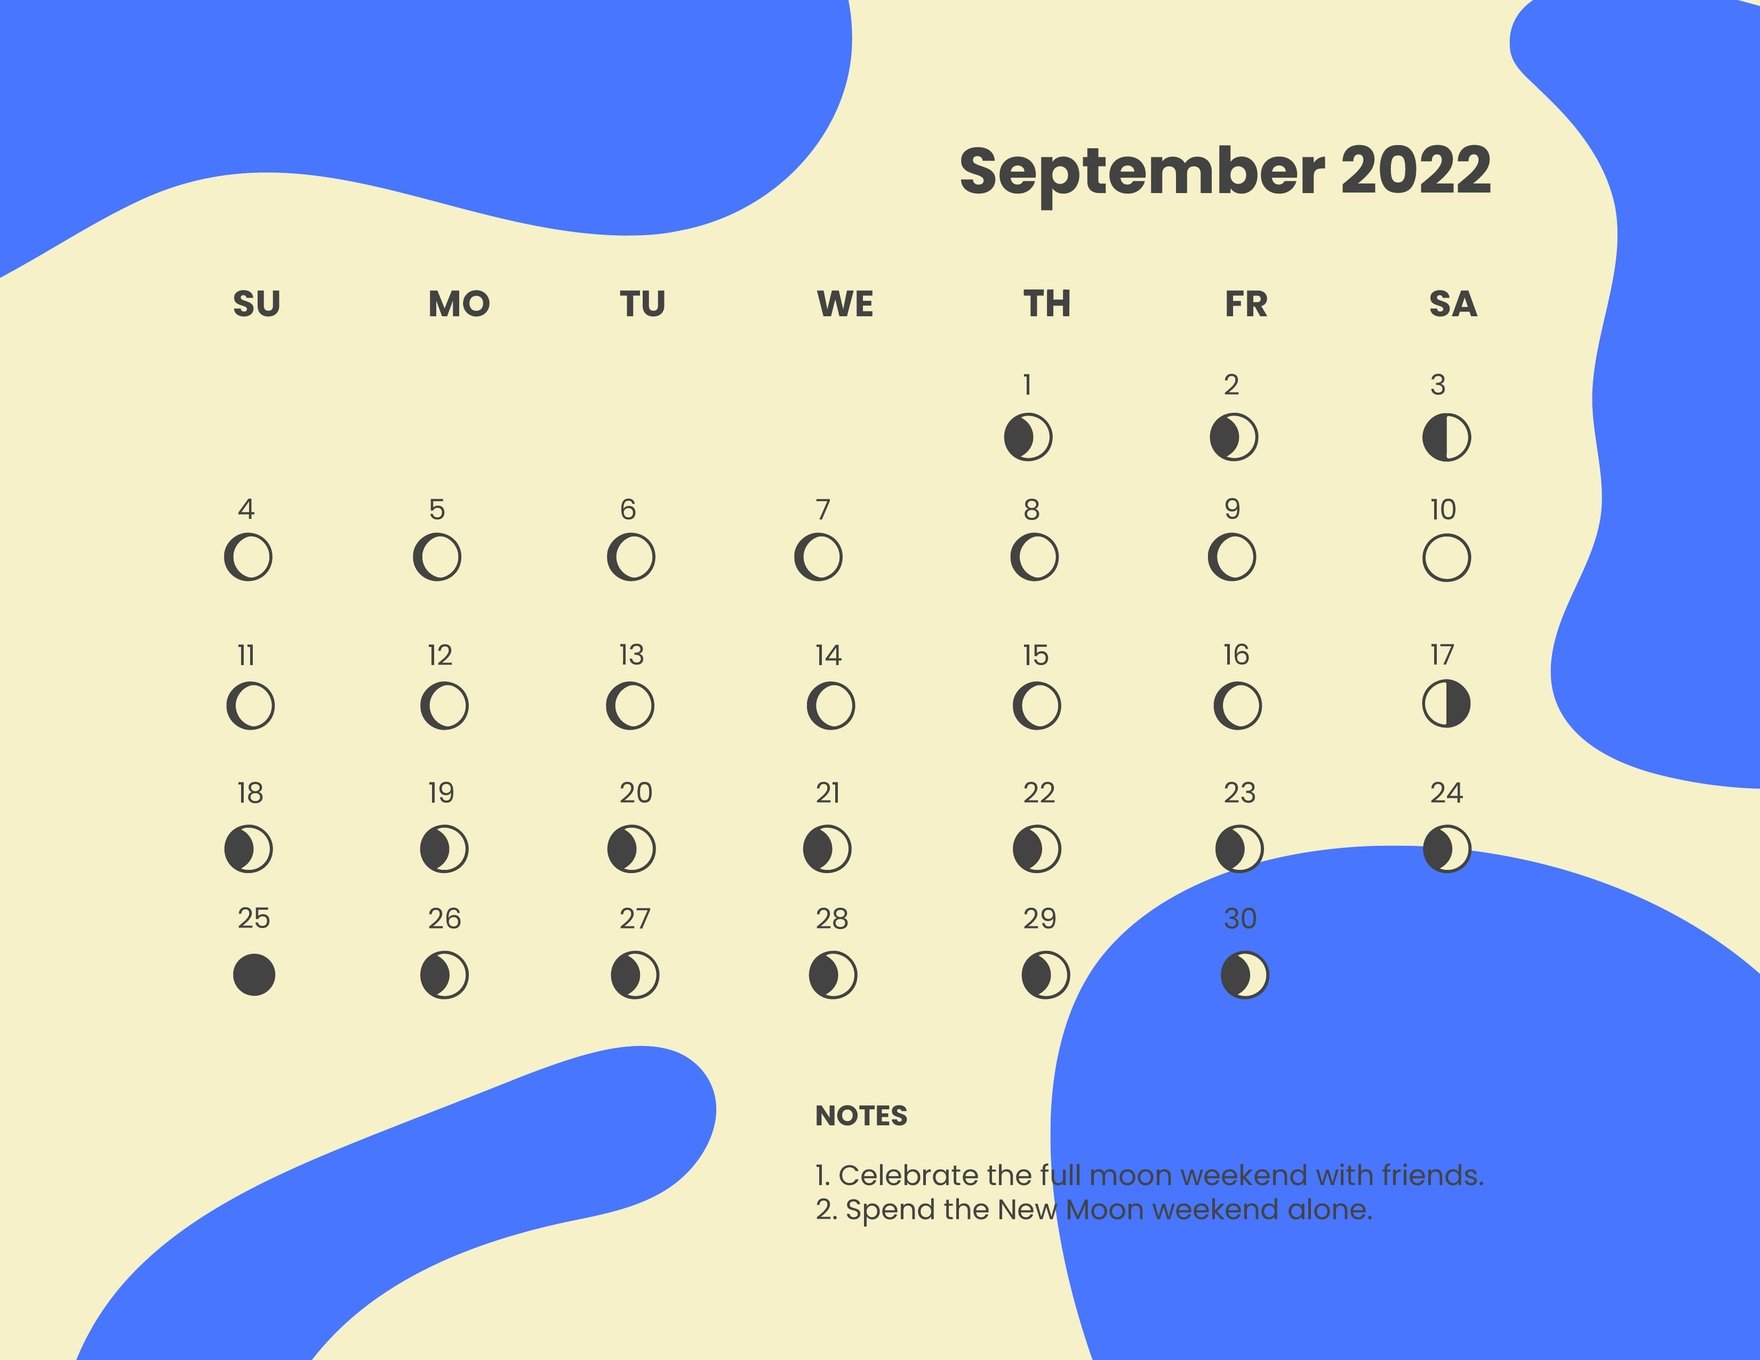 September 2022 Calendar With Moon Phases